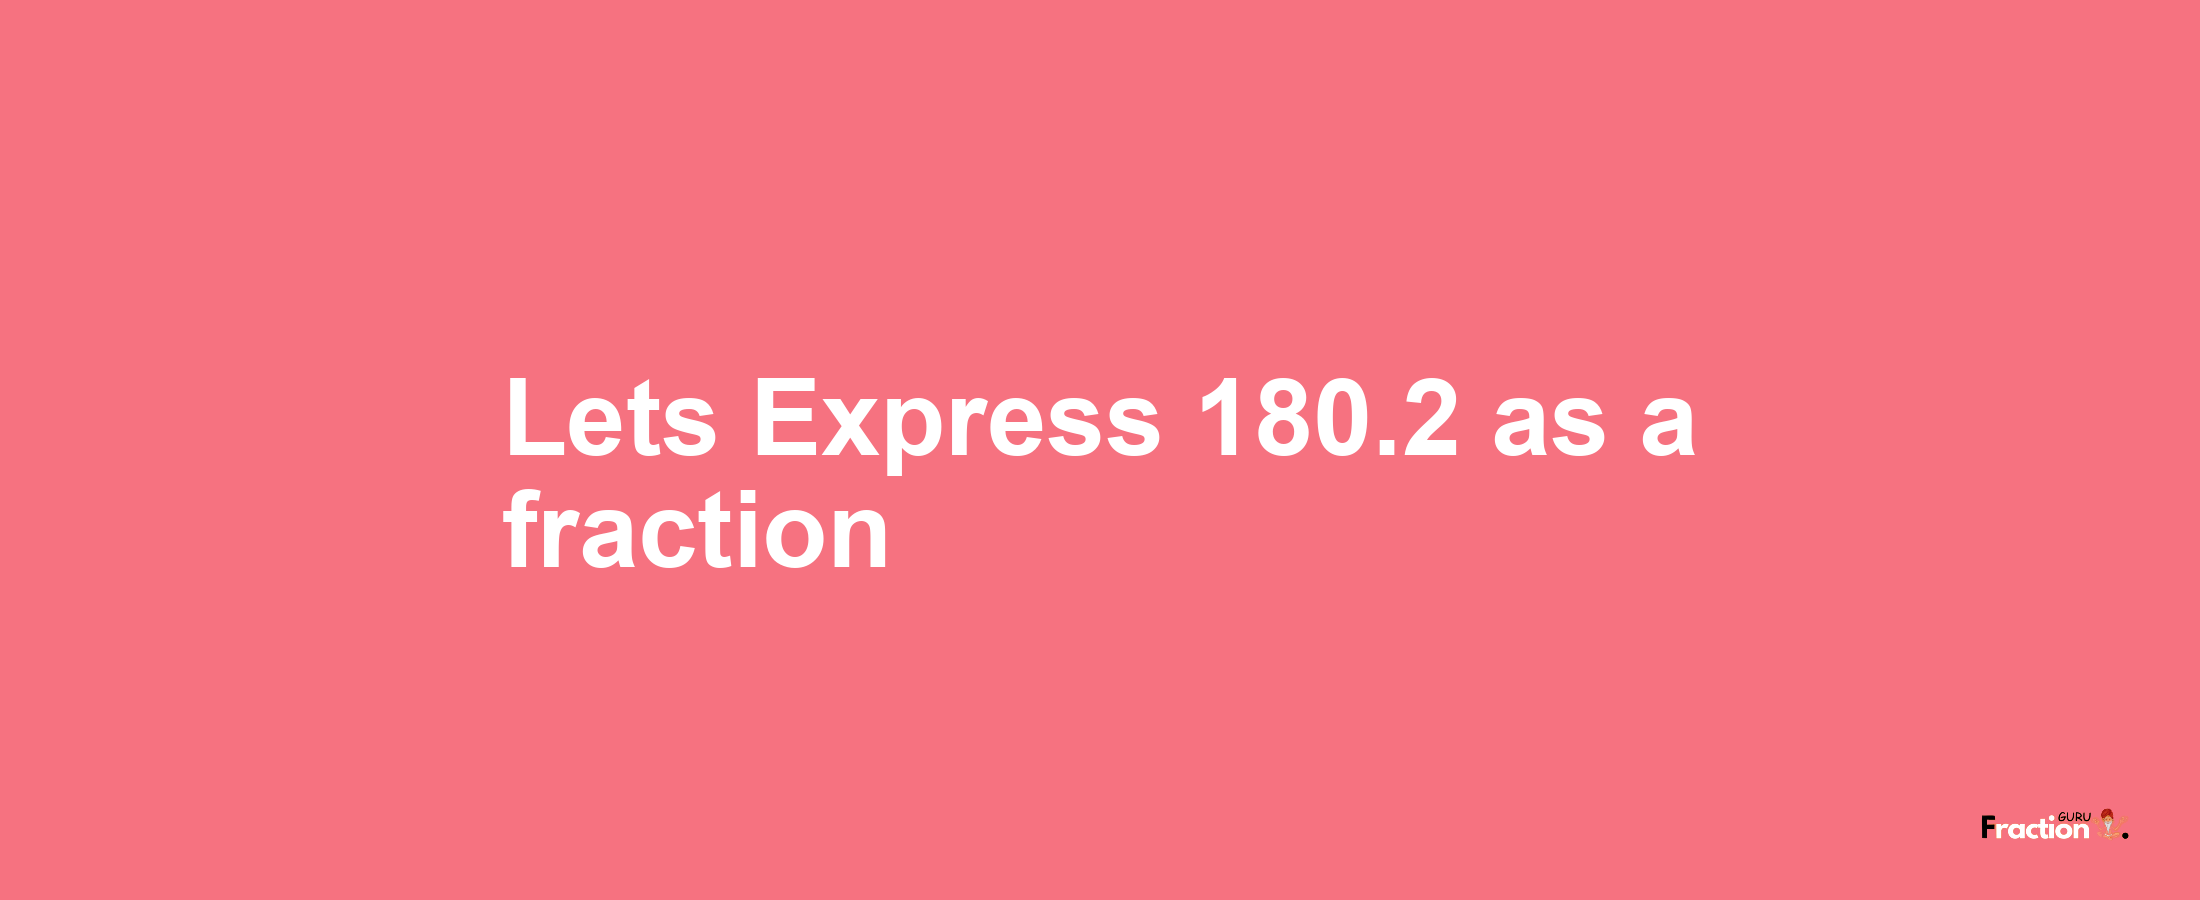 Lets Express 180.2 as afraction